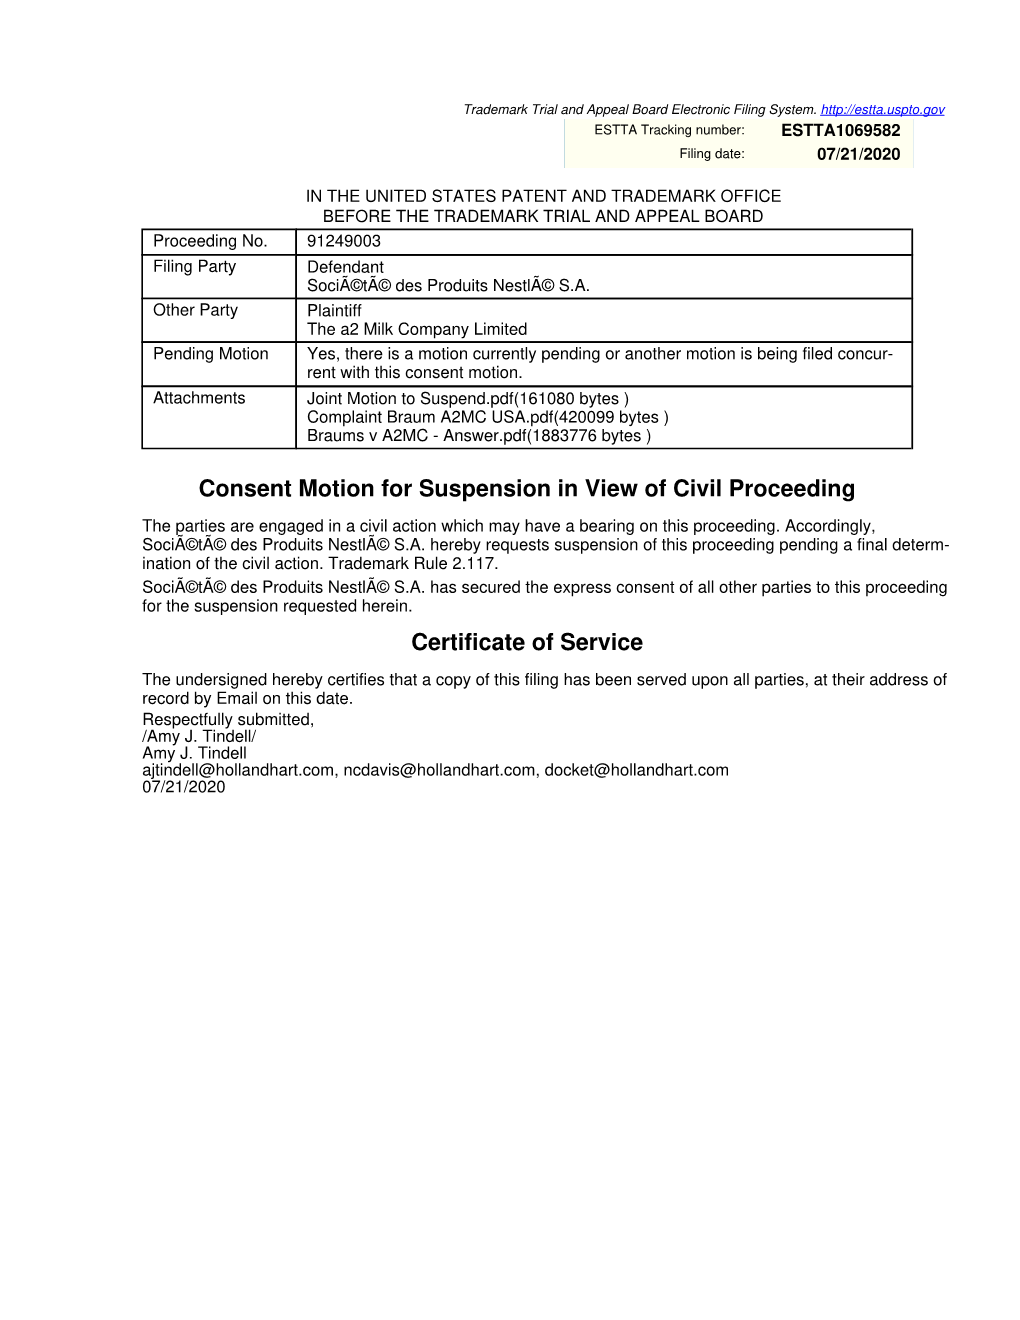 Consent Motion for Suspension in View of Civil Proceeding Certificate